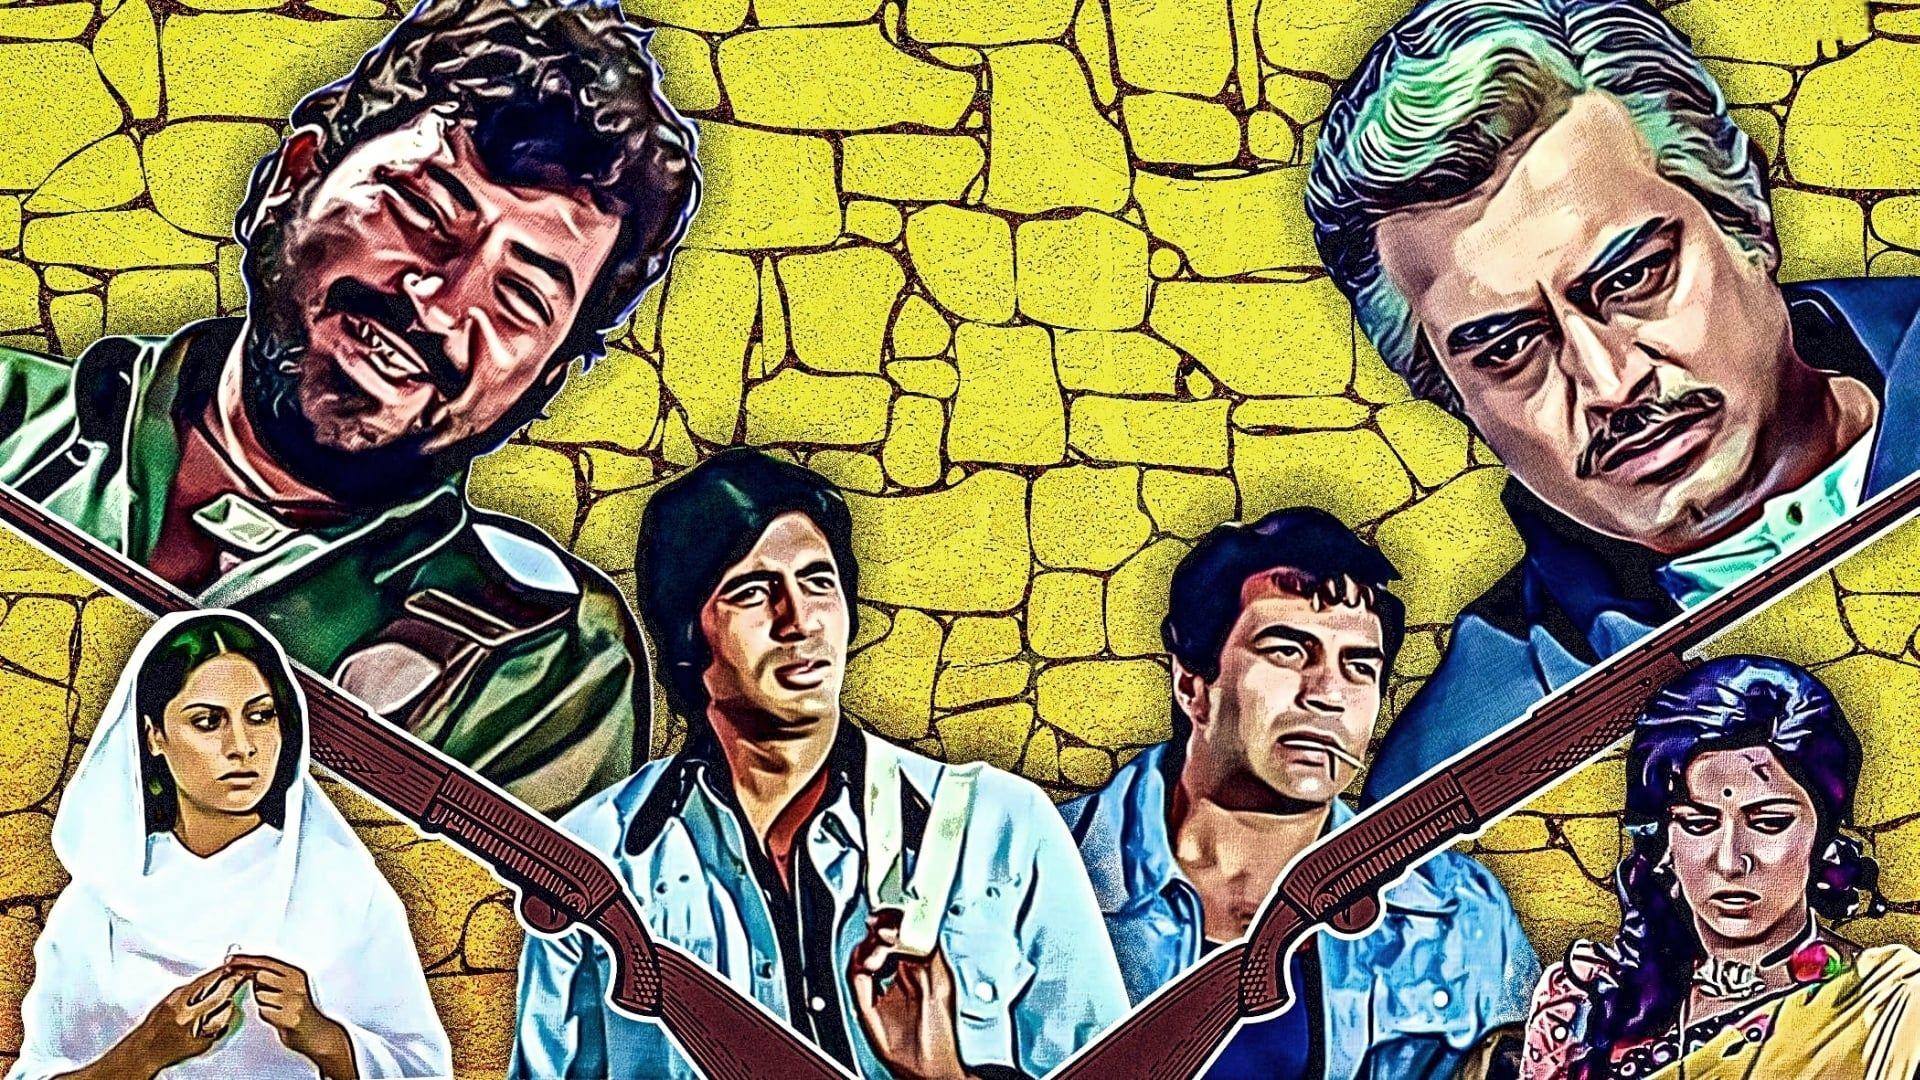 Sholay Mp3 1975 Songs Downloadming